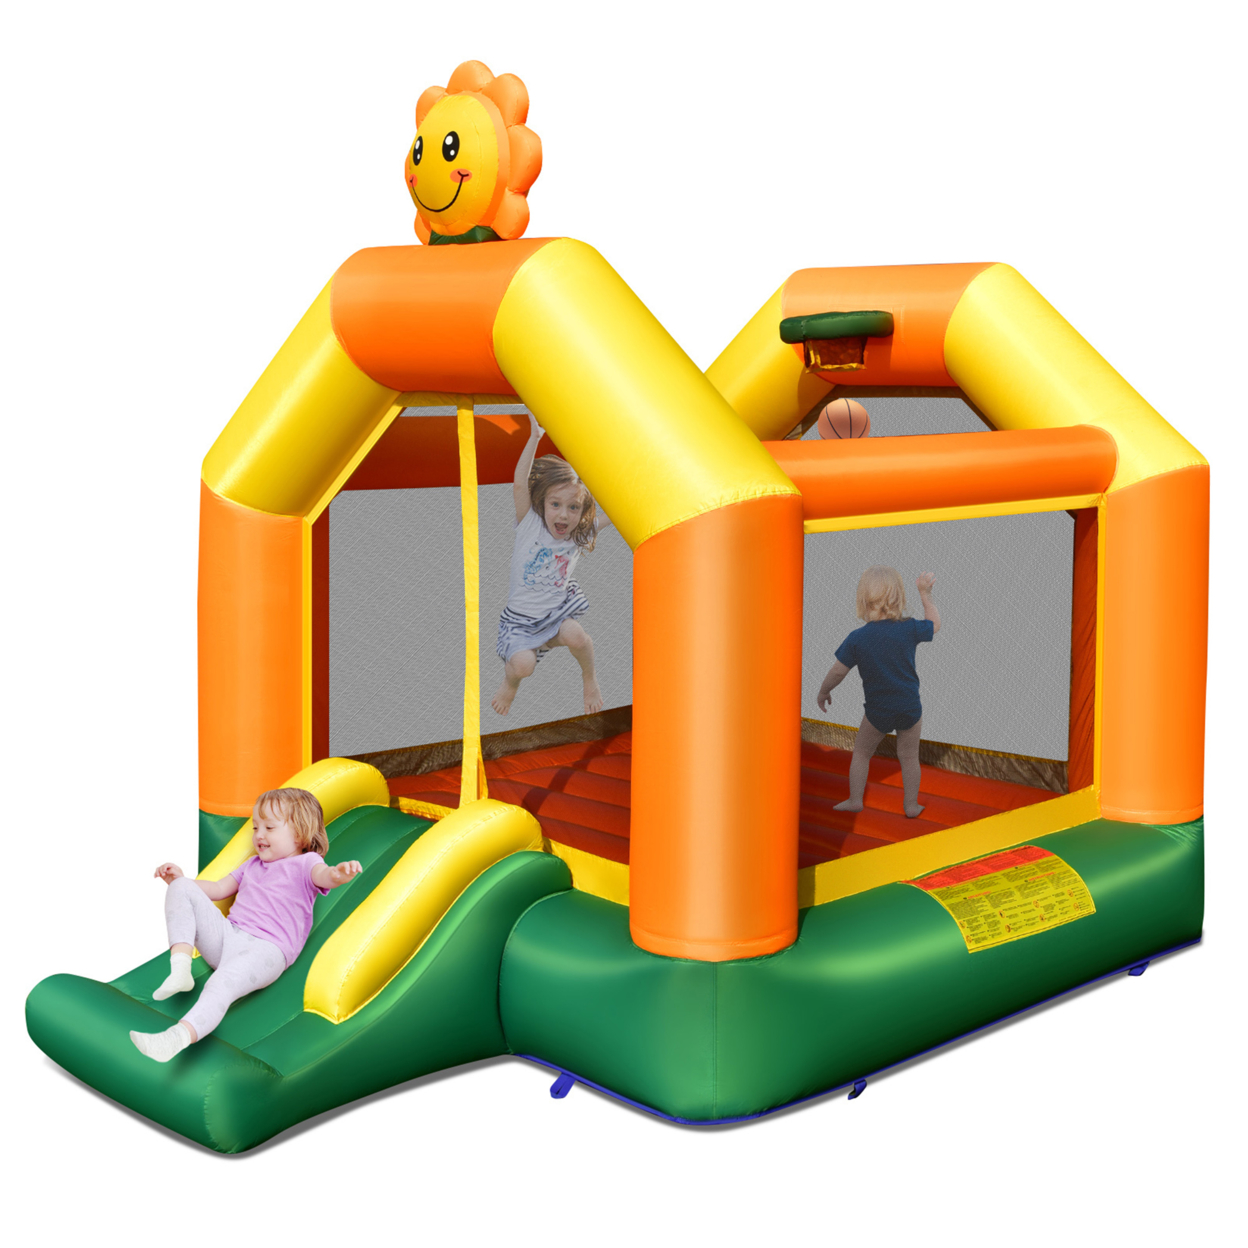 Inflatable Bounce Castle Jumping House Kids Playhouse W/ Slide Blower Excluded